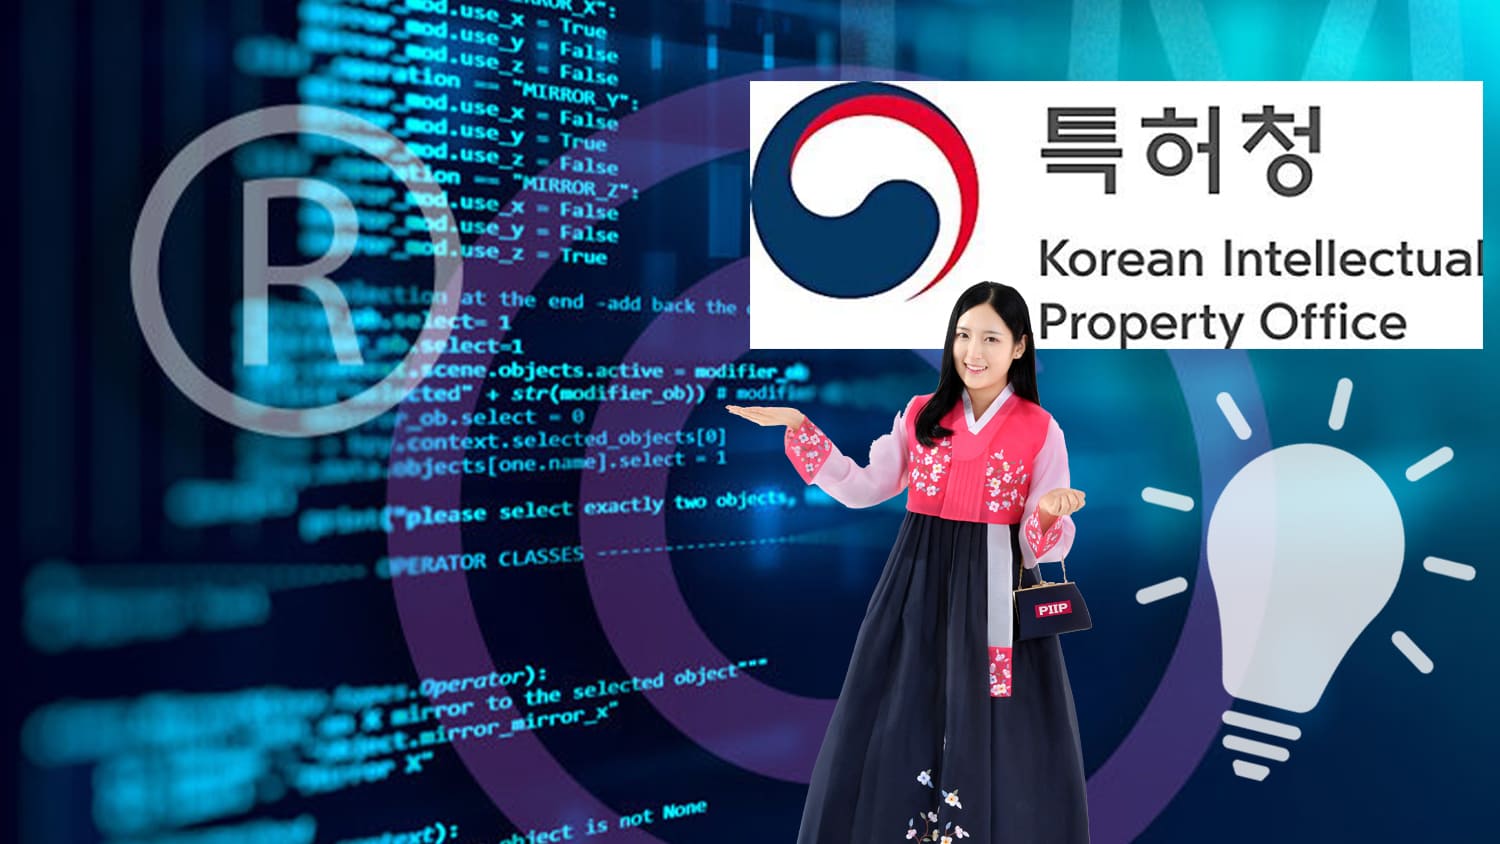 Korean Trademark: software related products and services must be marked with “purpose”